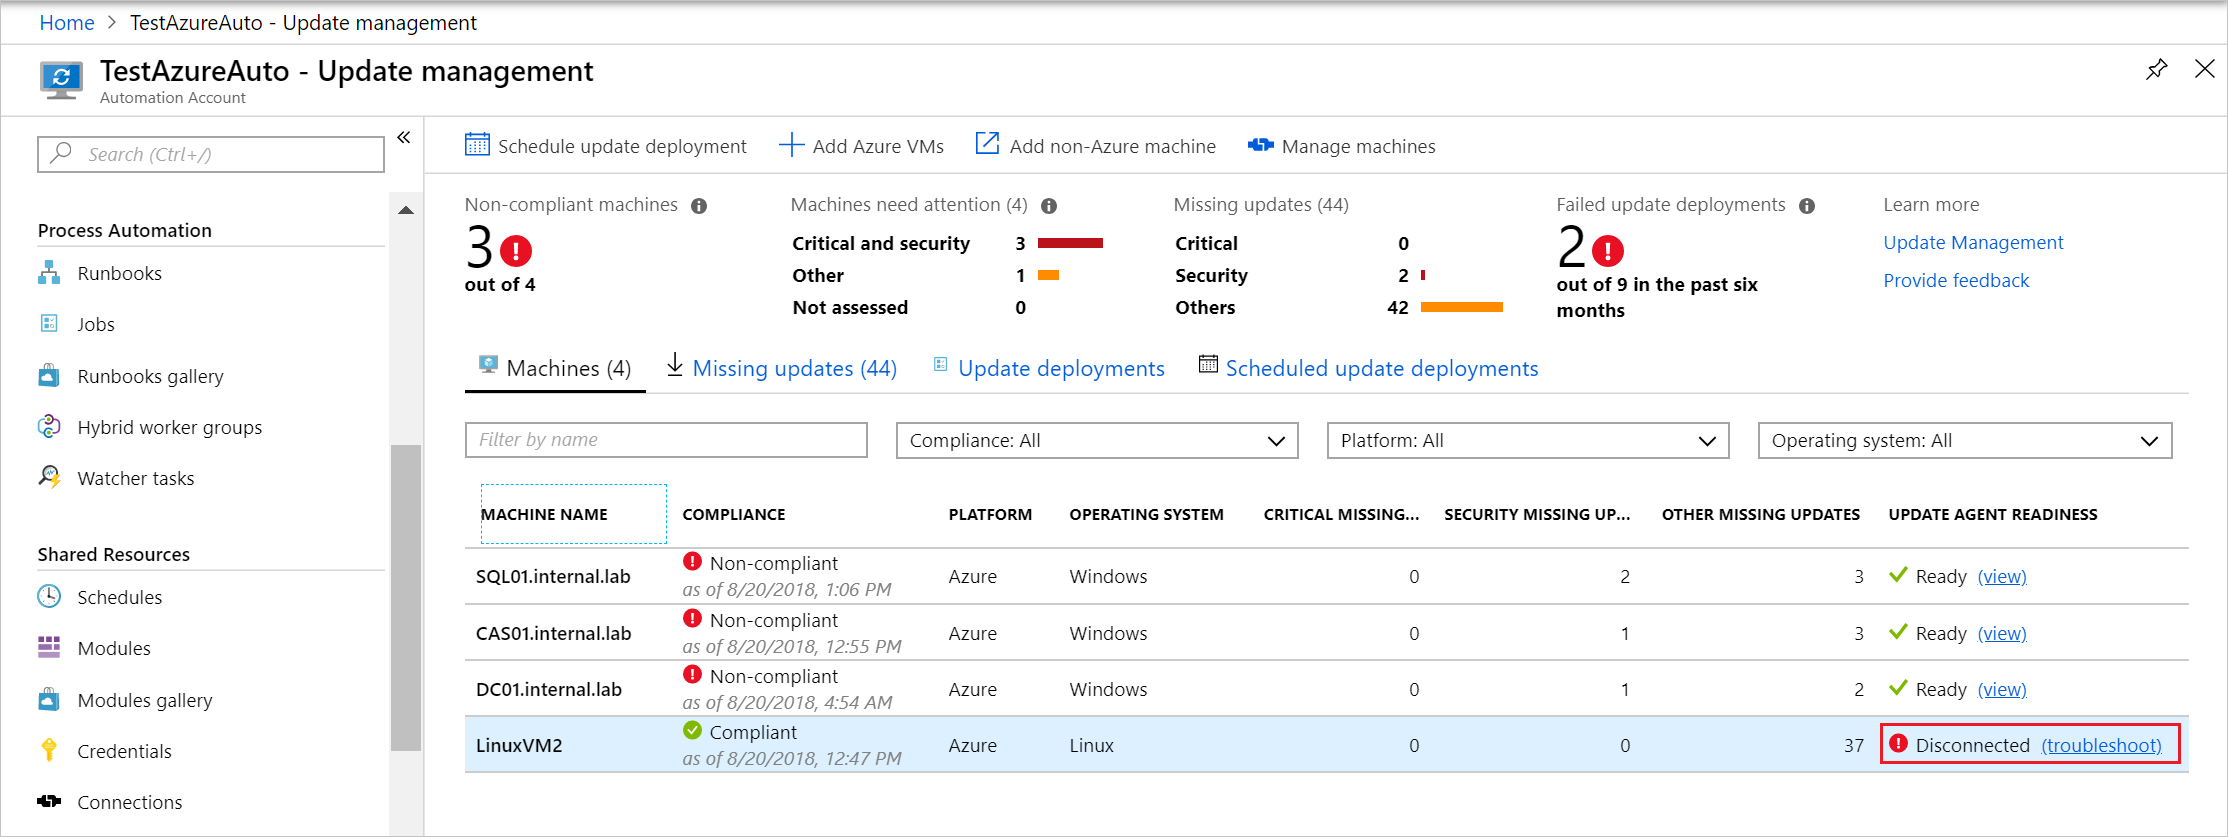 Deployment and Updates: WindowsAzureGuestAgent.exe is responsible for the deployment and update of the Windows Azure Guest Agent itself. It ensures that the latest version of the agent is running on the VM and handles the installation of any necessary patches or updates.
Troubleshooting: When encountering issues related to the Windows Azure Guest Agent, including WindowsAzureGuestAgent.exe, troubleshooting steps may involve checking agent logs, verifying connectivity to the Azure platform, ensur